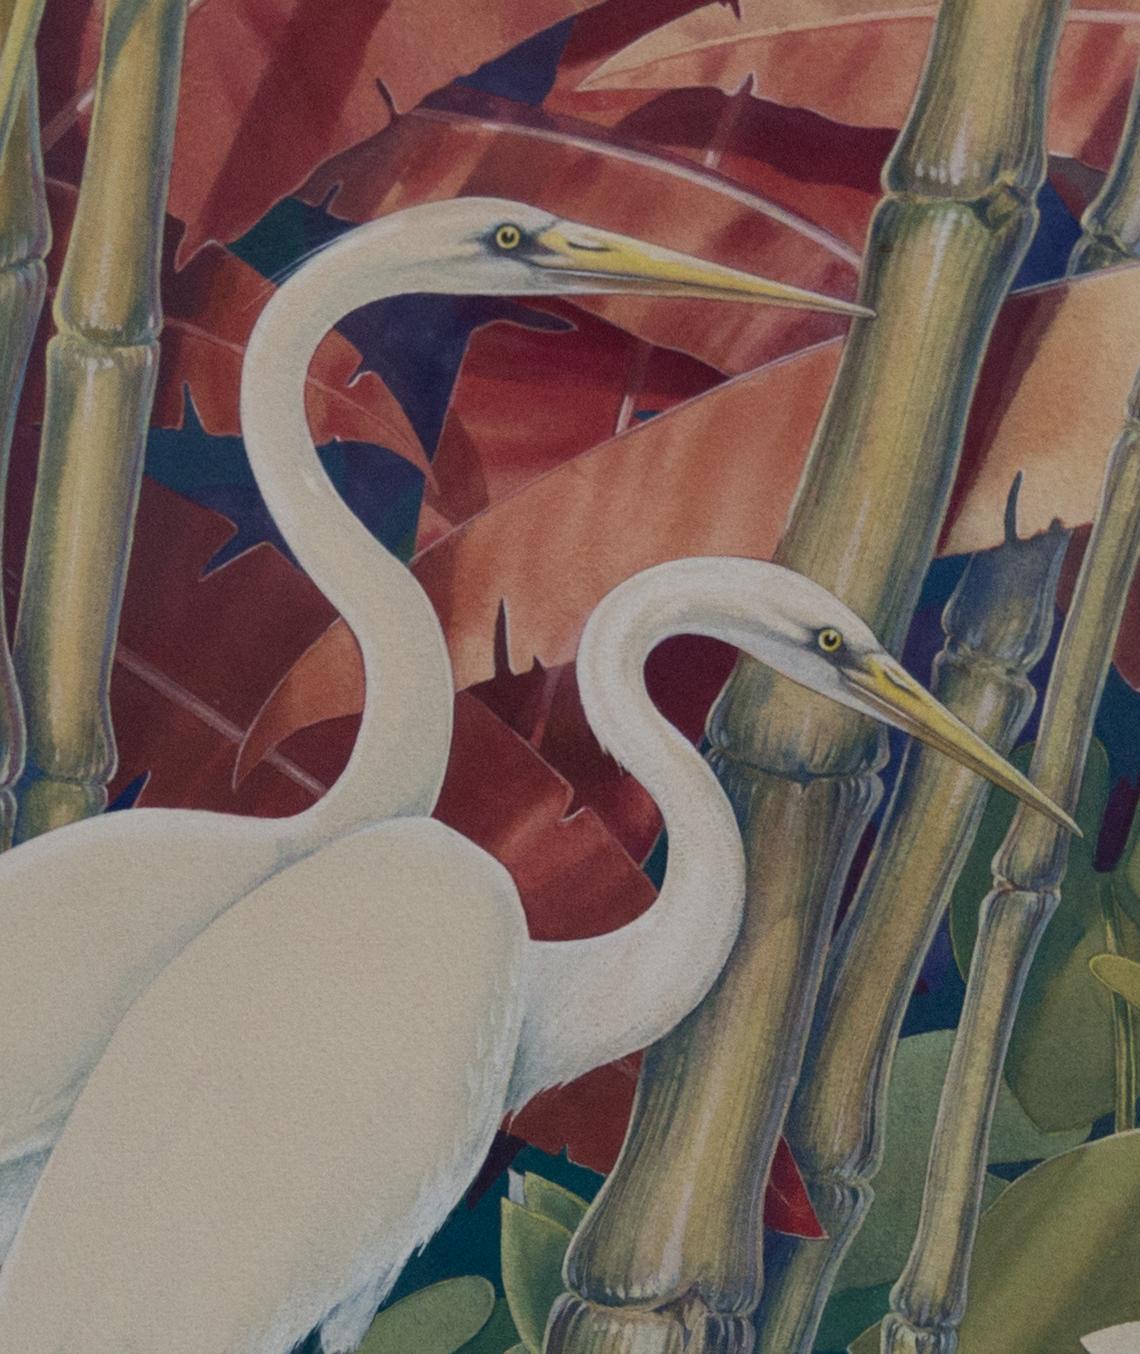 Offered is a Jessie Hazel Arms Botke (attribute) watercolor/gouache painting depicting white cranes amidst foliage. Botke attended the Chicago Art Institute, worked with Albert Herter on designs and also as a muralist in New York City and in San